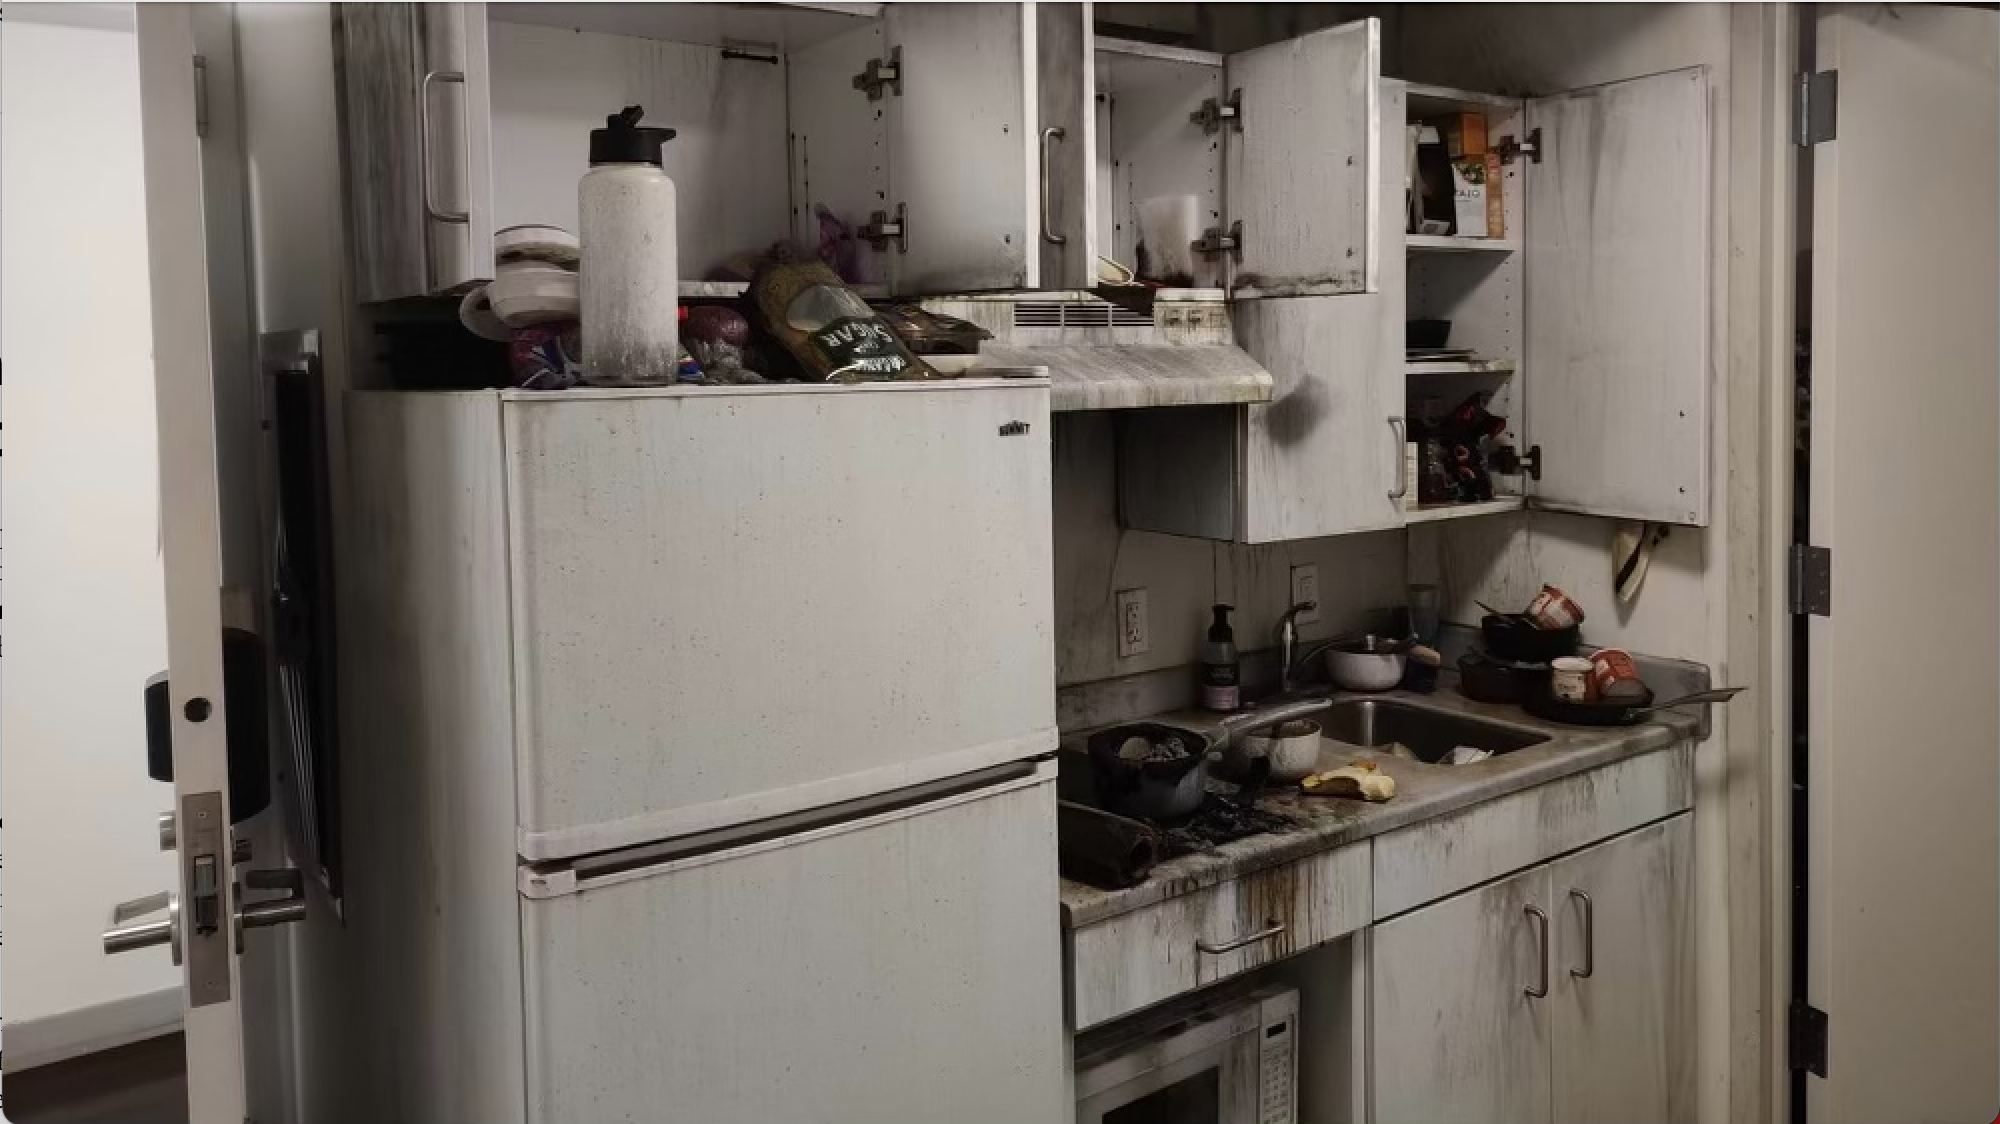 Image of a burned kitchen from the 301 Residence Hall